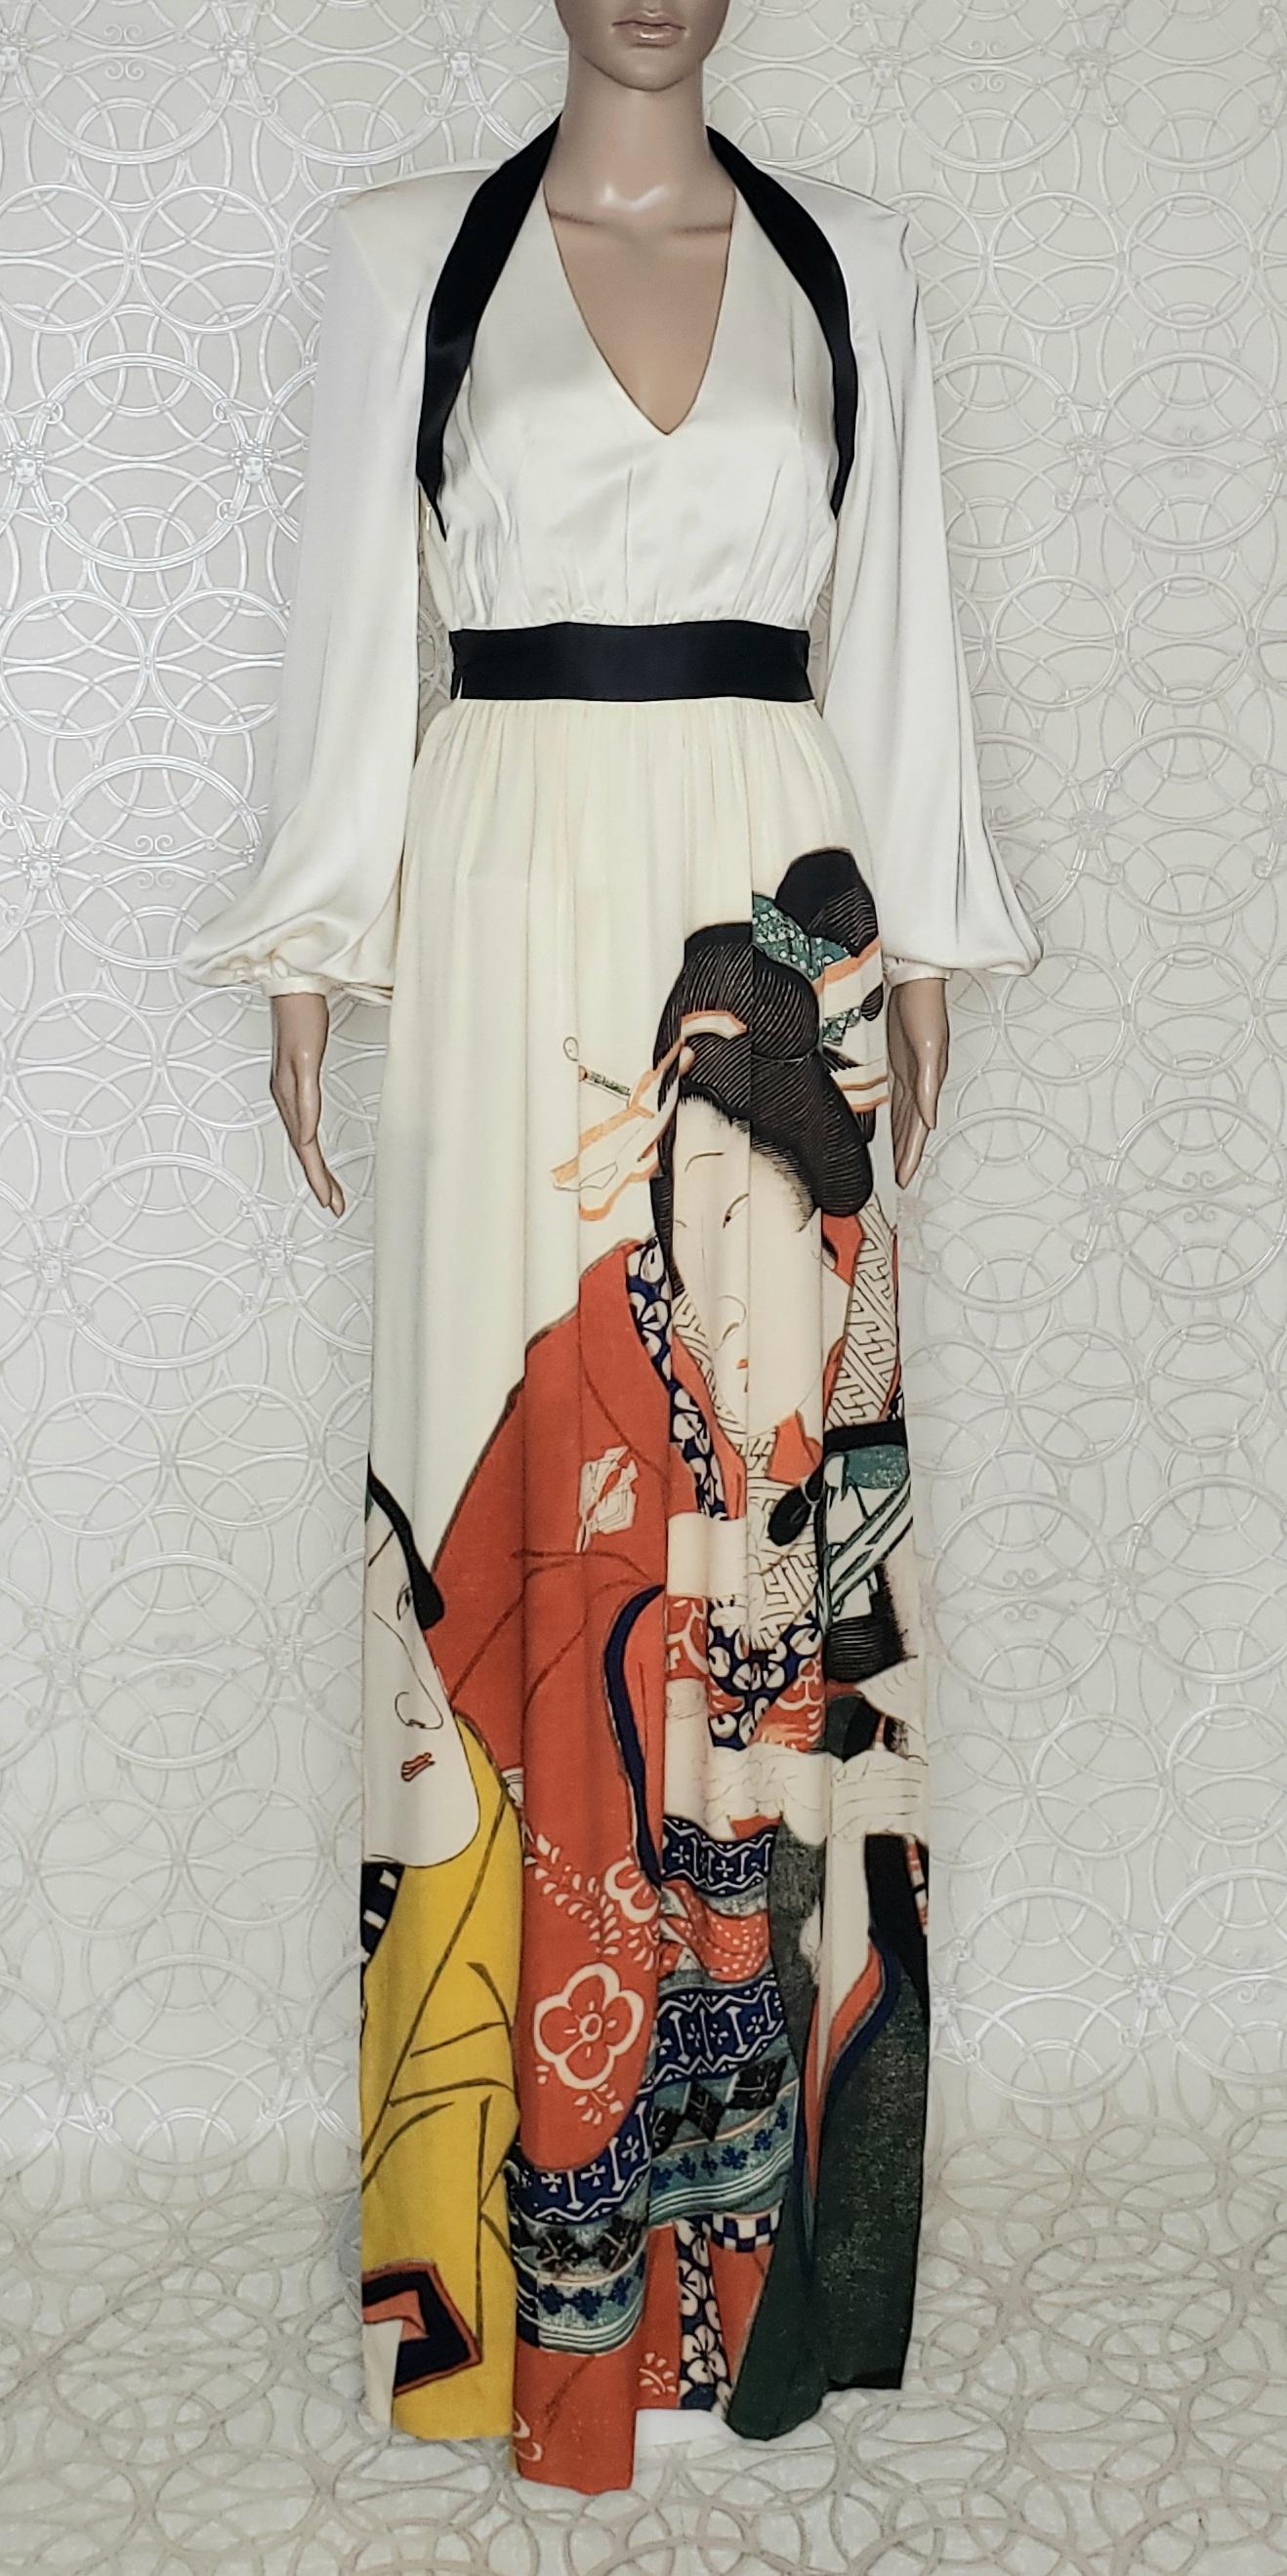 DRIES VAN NOTEN

Dries Van Noten Silk Printed Japanese Dress with Sleeves.  

V-neck

Color: White

Size: 36 or US - S

Content: 100% Silk

Length: Back 160cm

Pre-owned, in excellent condition.
PLEASE VISIT OUR STORE FOR MORE GREAT ITEMS

 